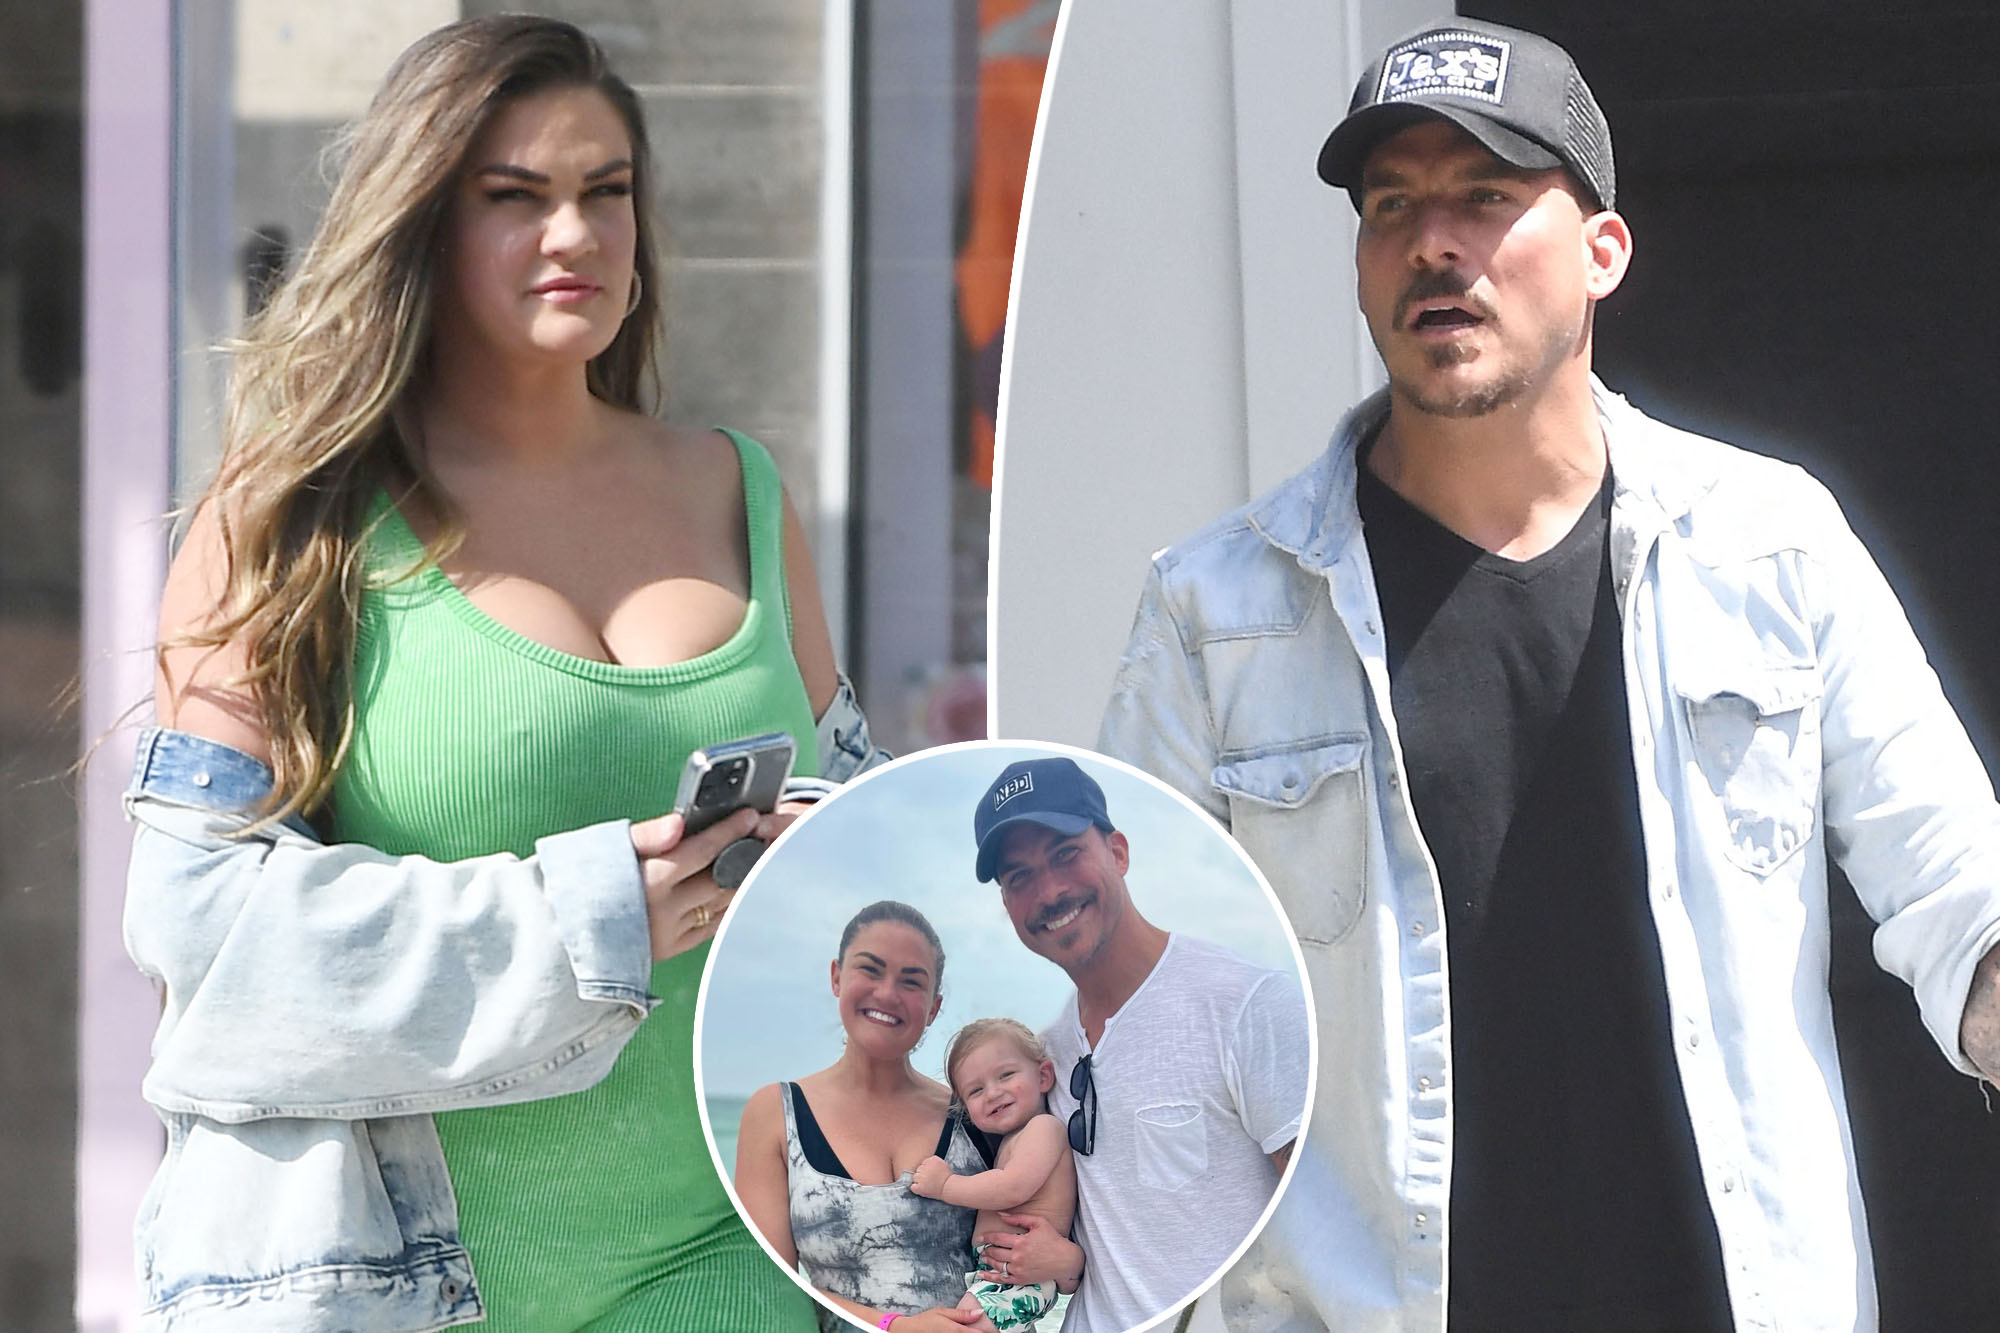 Jax Taylor claims estranged wife Brittany Cartwright has 'been sleeping with' someone for '4 months' in since-deleted tweet